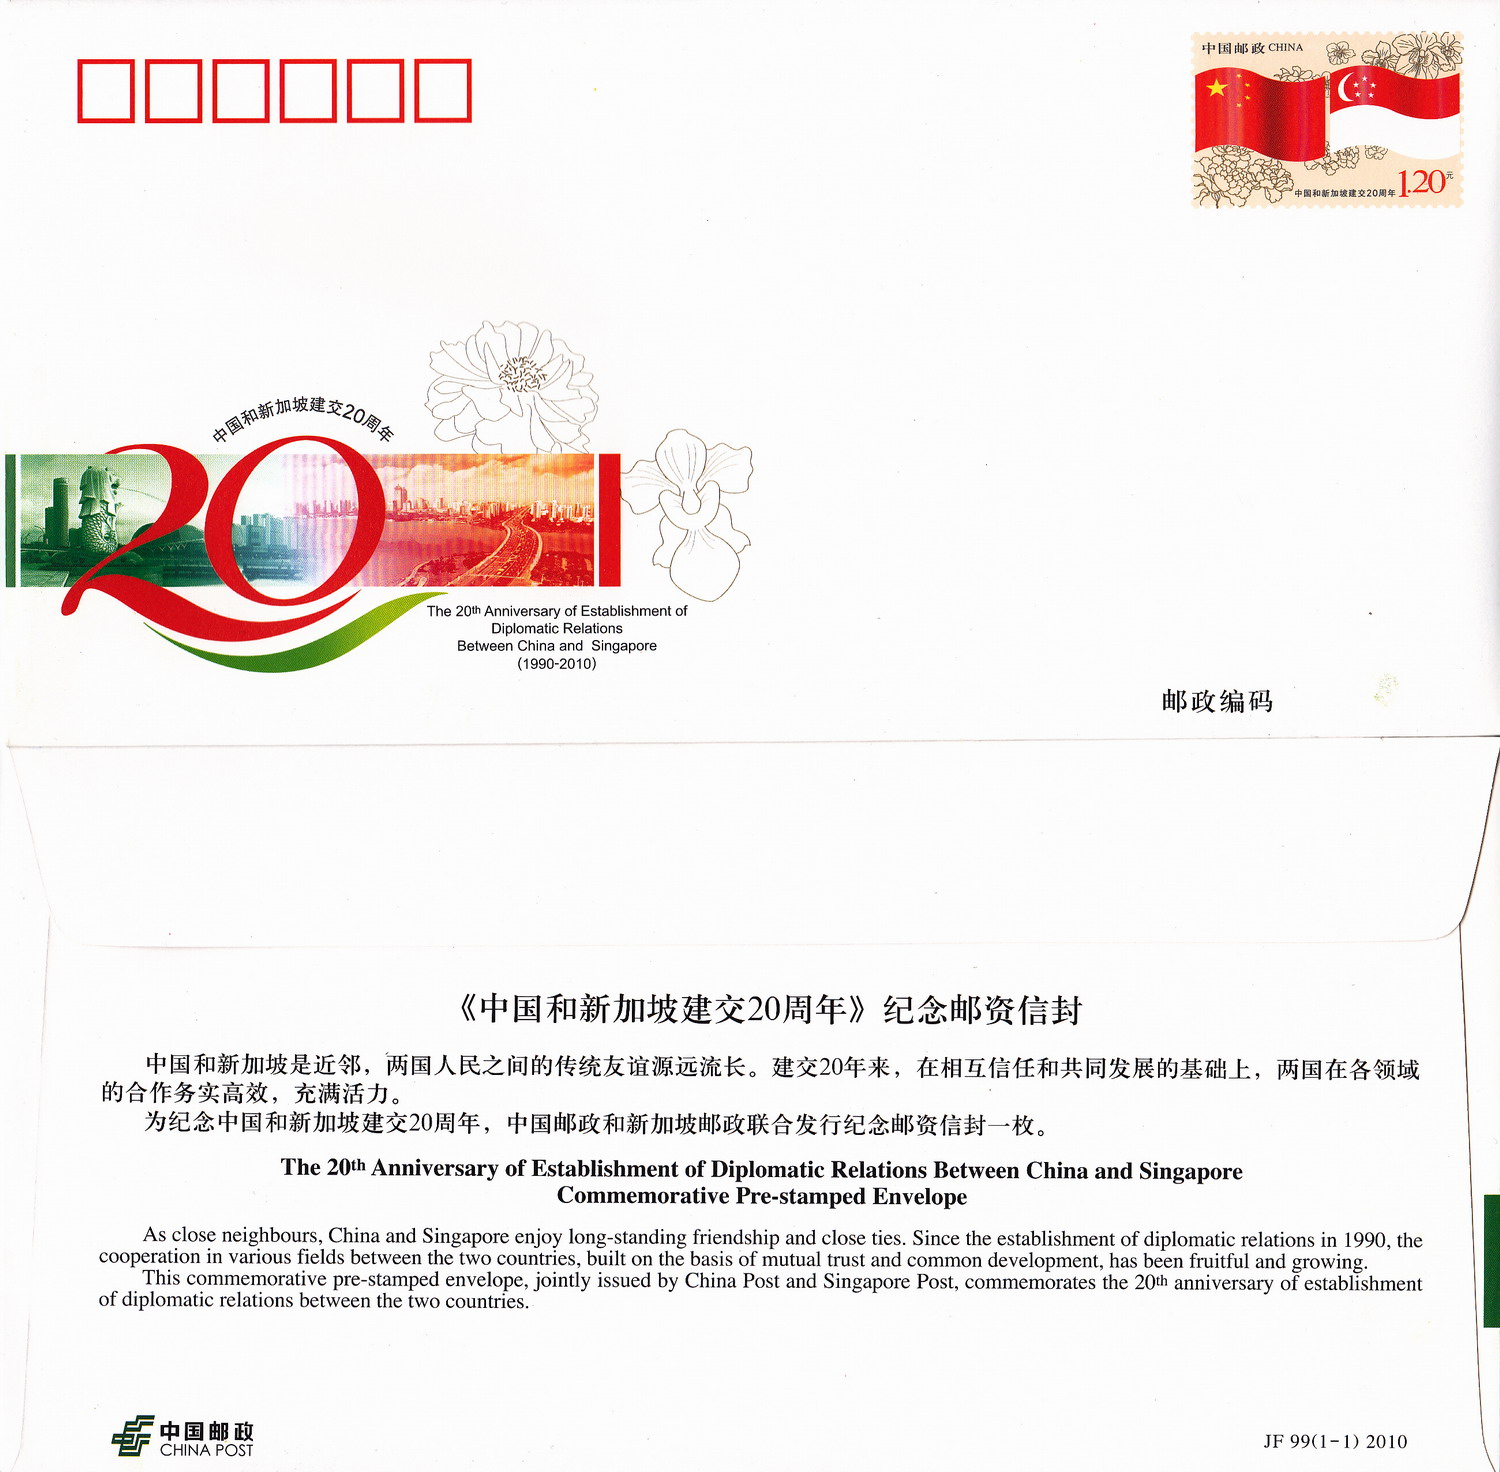 JF99 The 20th Anniversary of Diplomatic Between China and Singapore, 2010